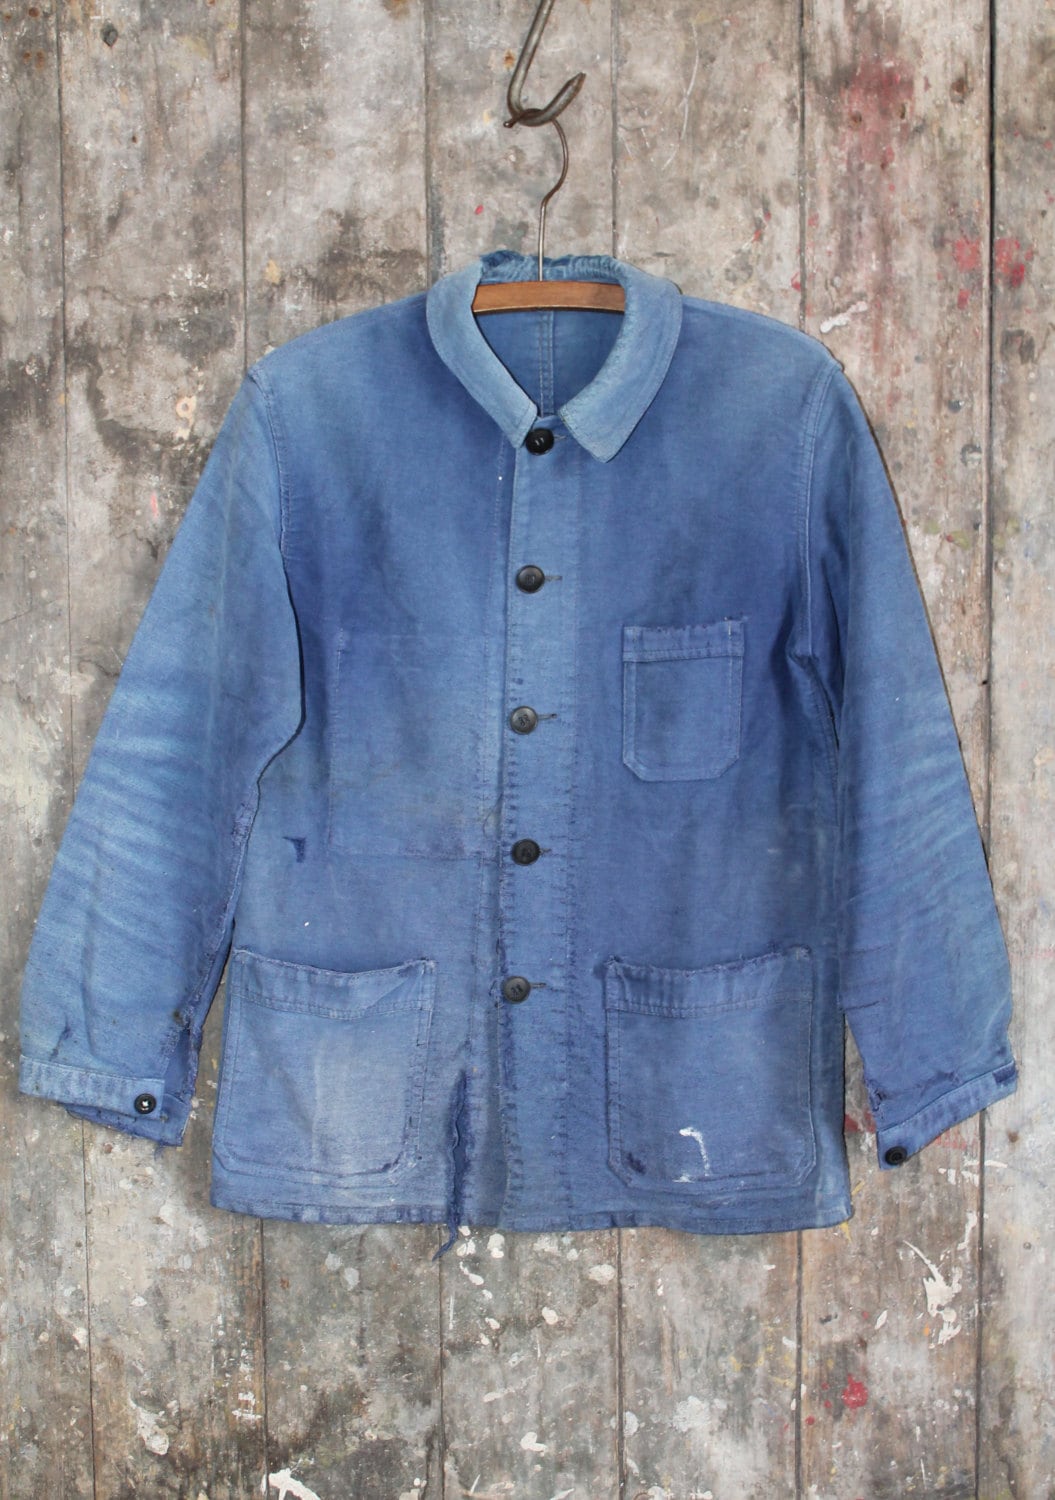 Vintage 1950s blue worn out sun-faded blue french work shirt